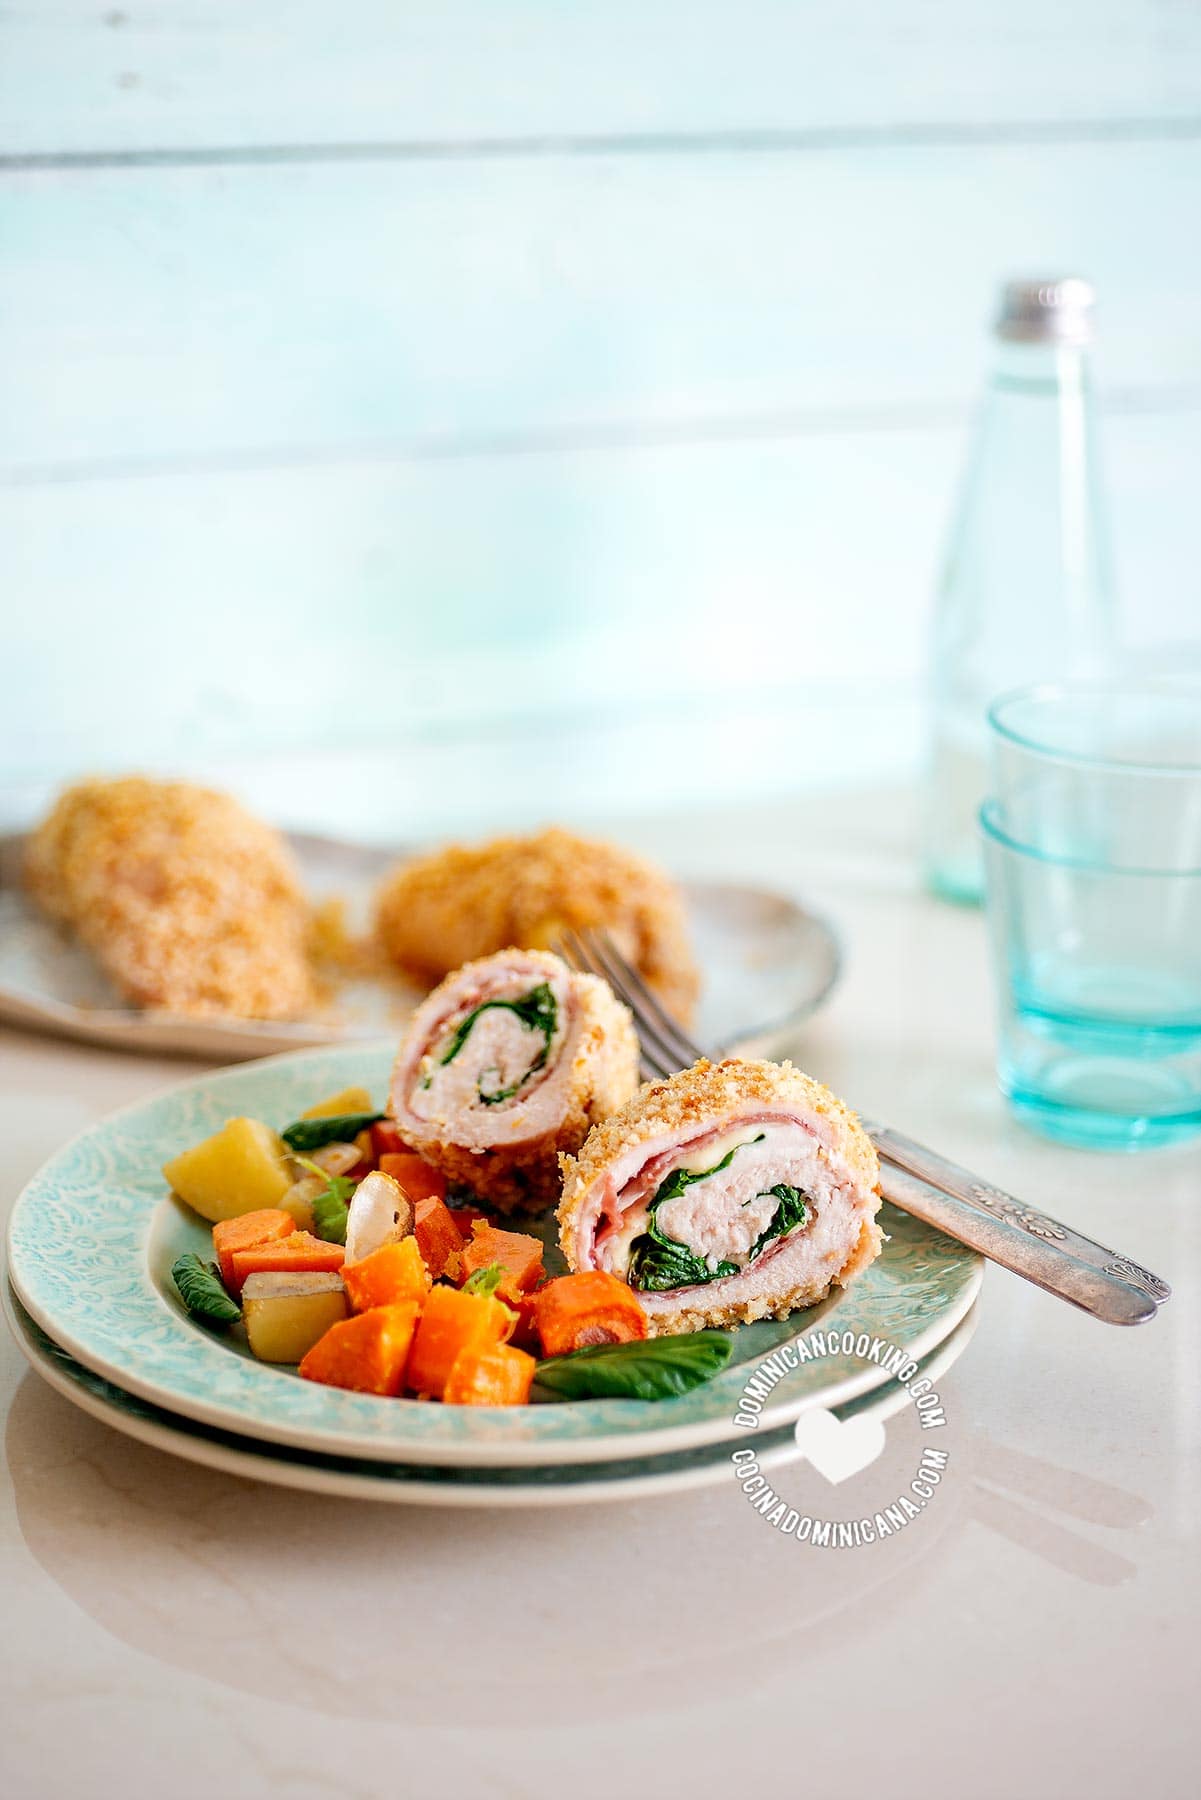 Cordon Bleu Chicken with Mushroom Sauce and vegetables